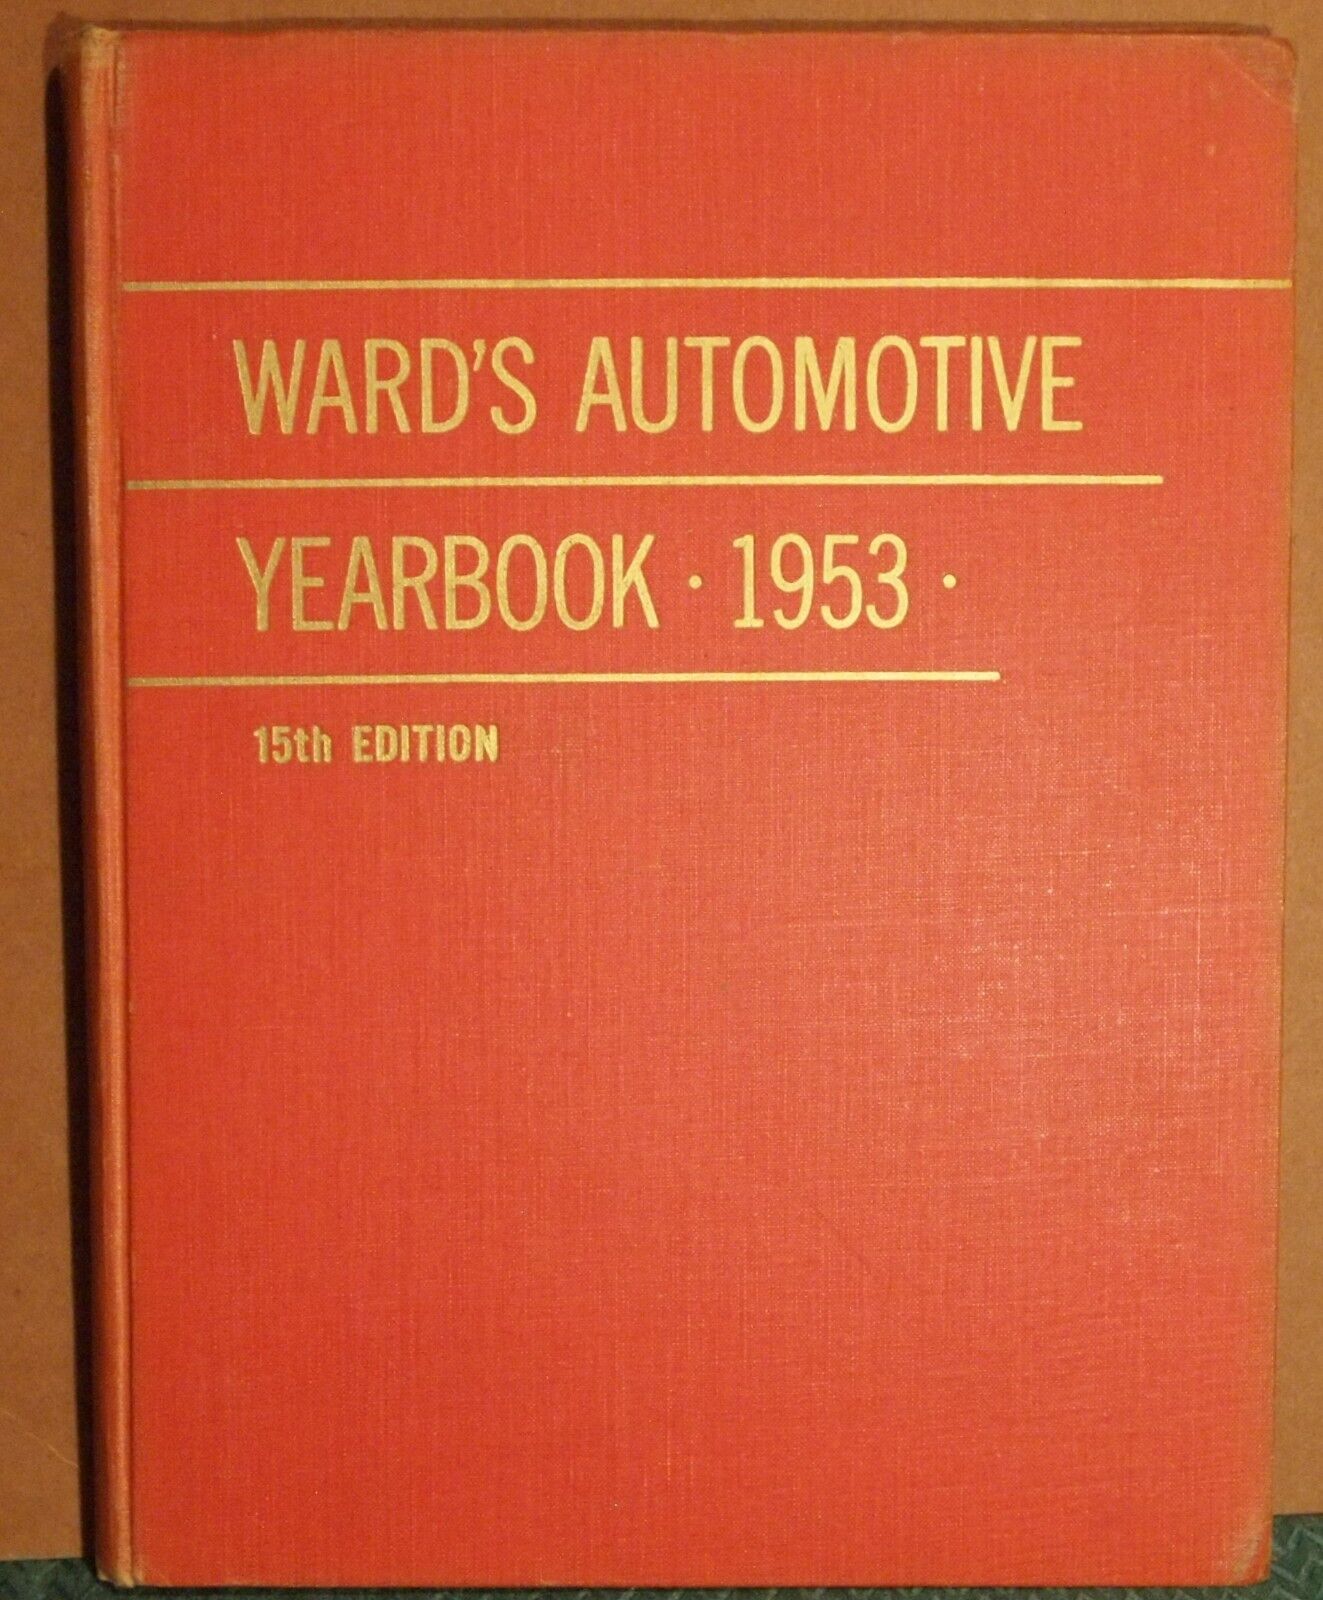 1953 WARD\'S AUTOMOTIVE YEARBOOK 15th edition WARDS-10